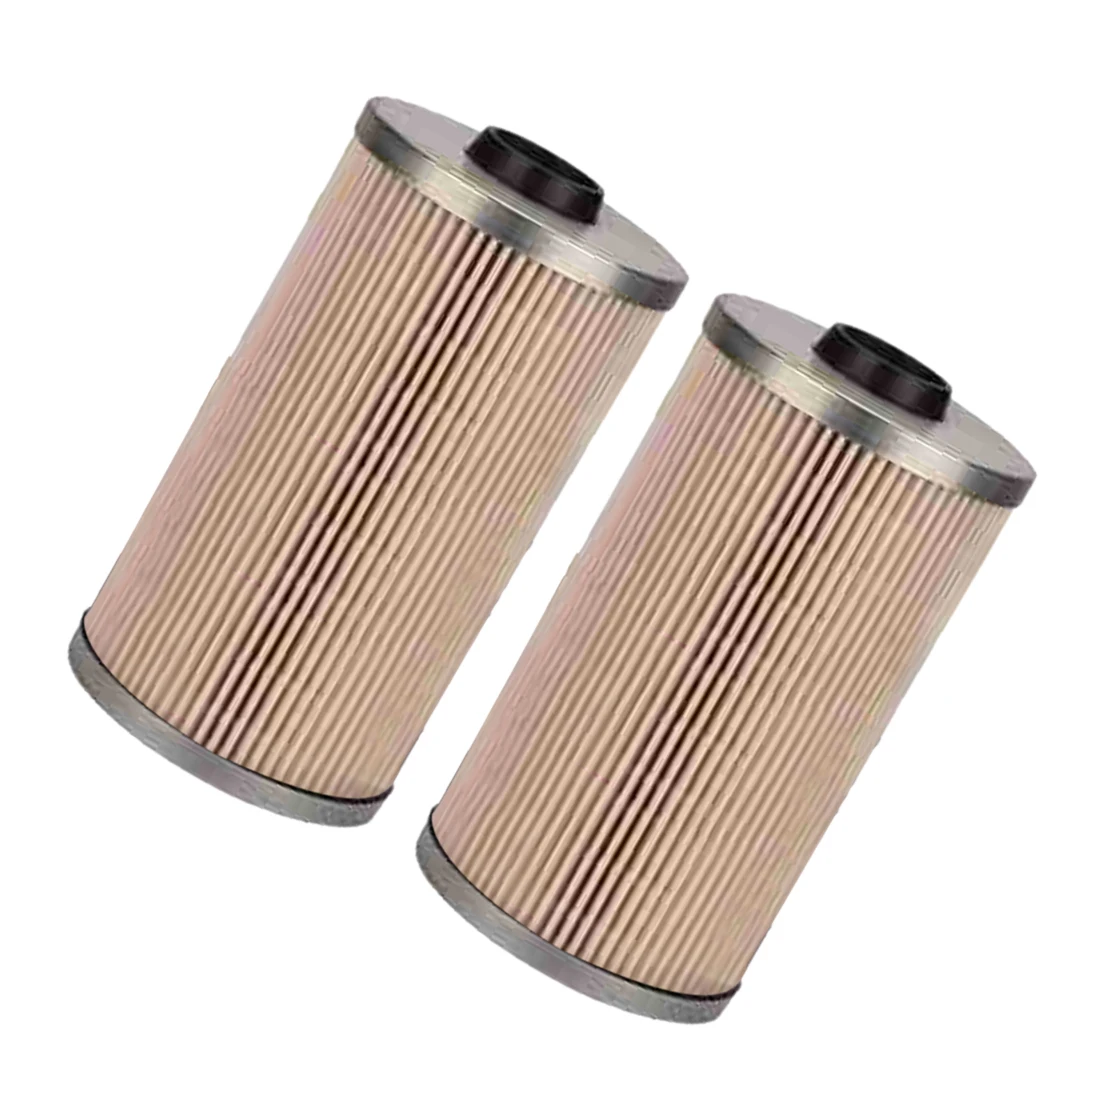 

2Pcs Fuel Oil Water Separator Filters FS19765 FS19763 Fit for DAVCO 102528 FH23435 FH23447 FH23448 FH23453 PF7930 P550851